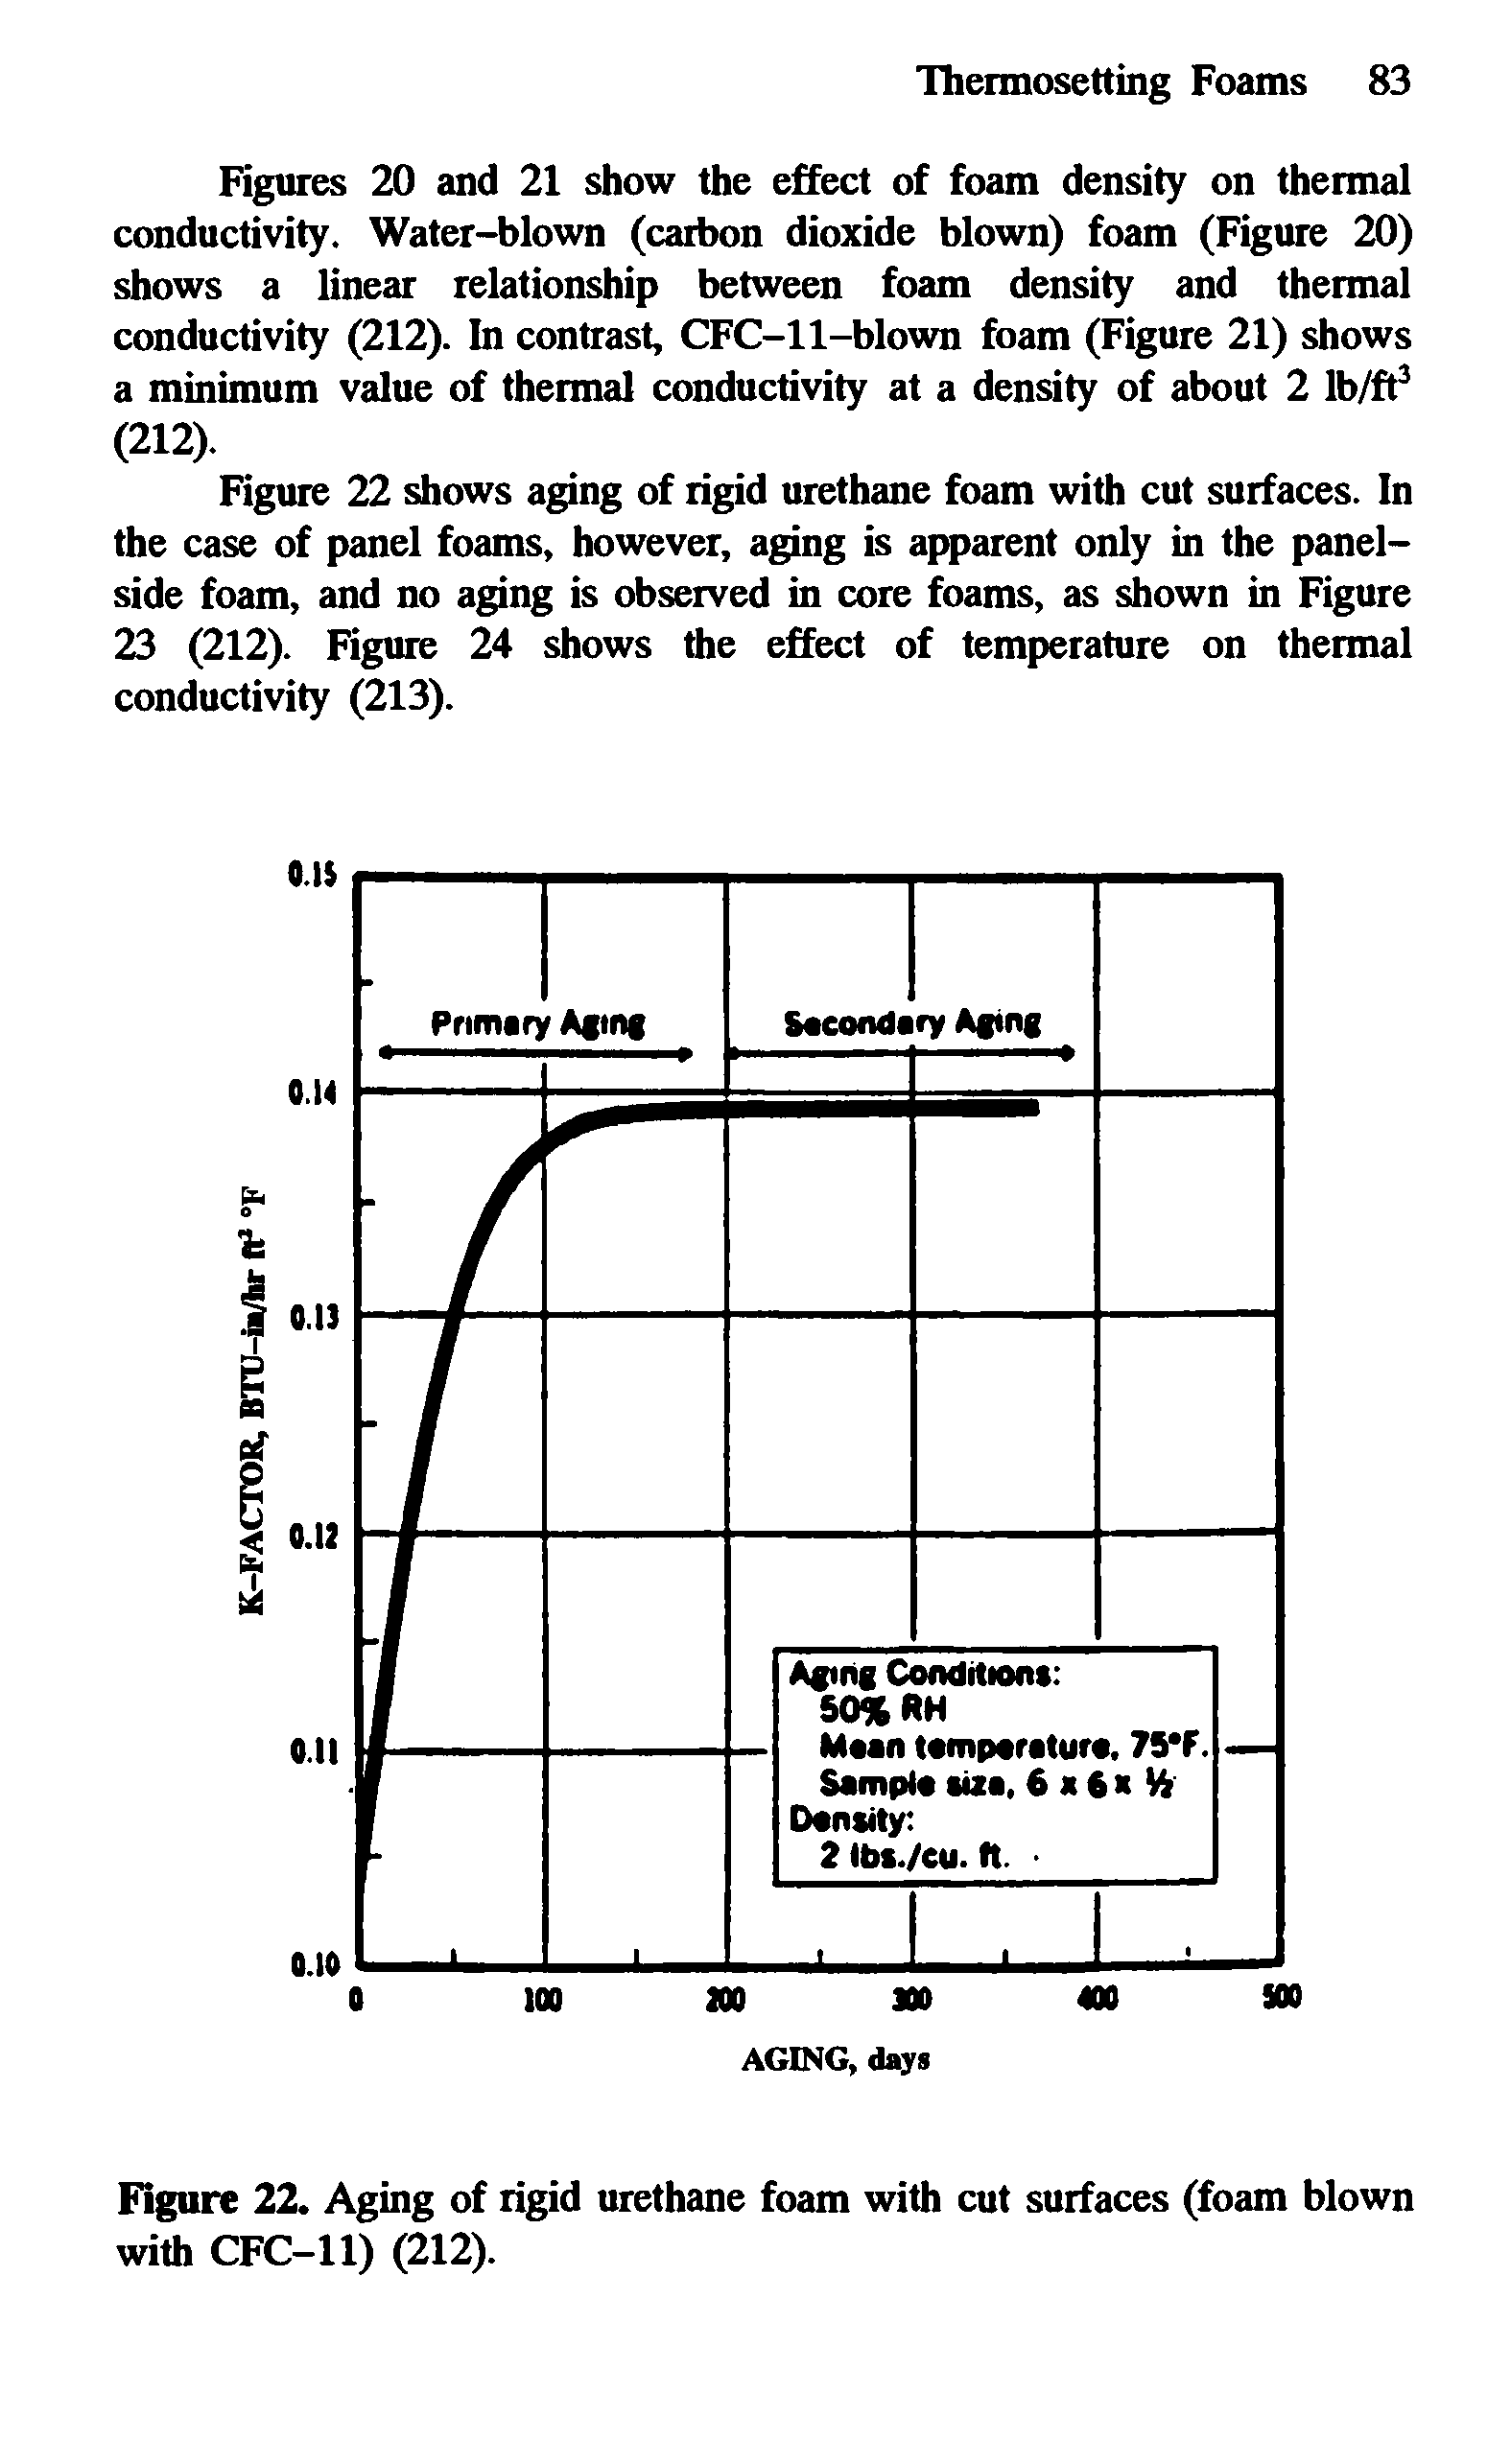 Figure 22. Aging of rigid urethane foam with cut surfaces (foam blown with CFC-11) (212).